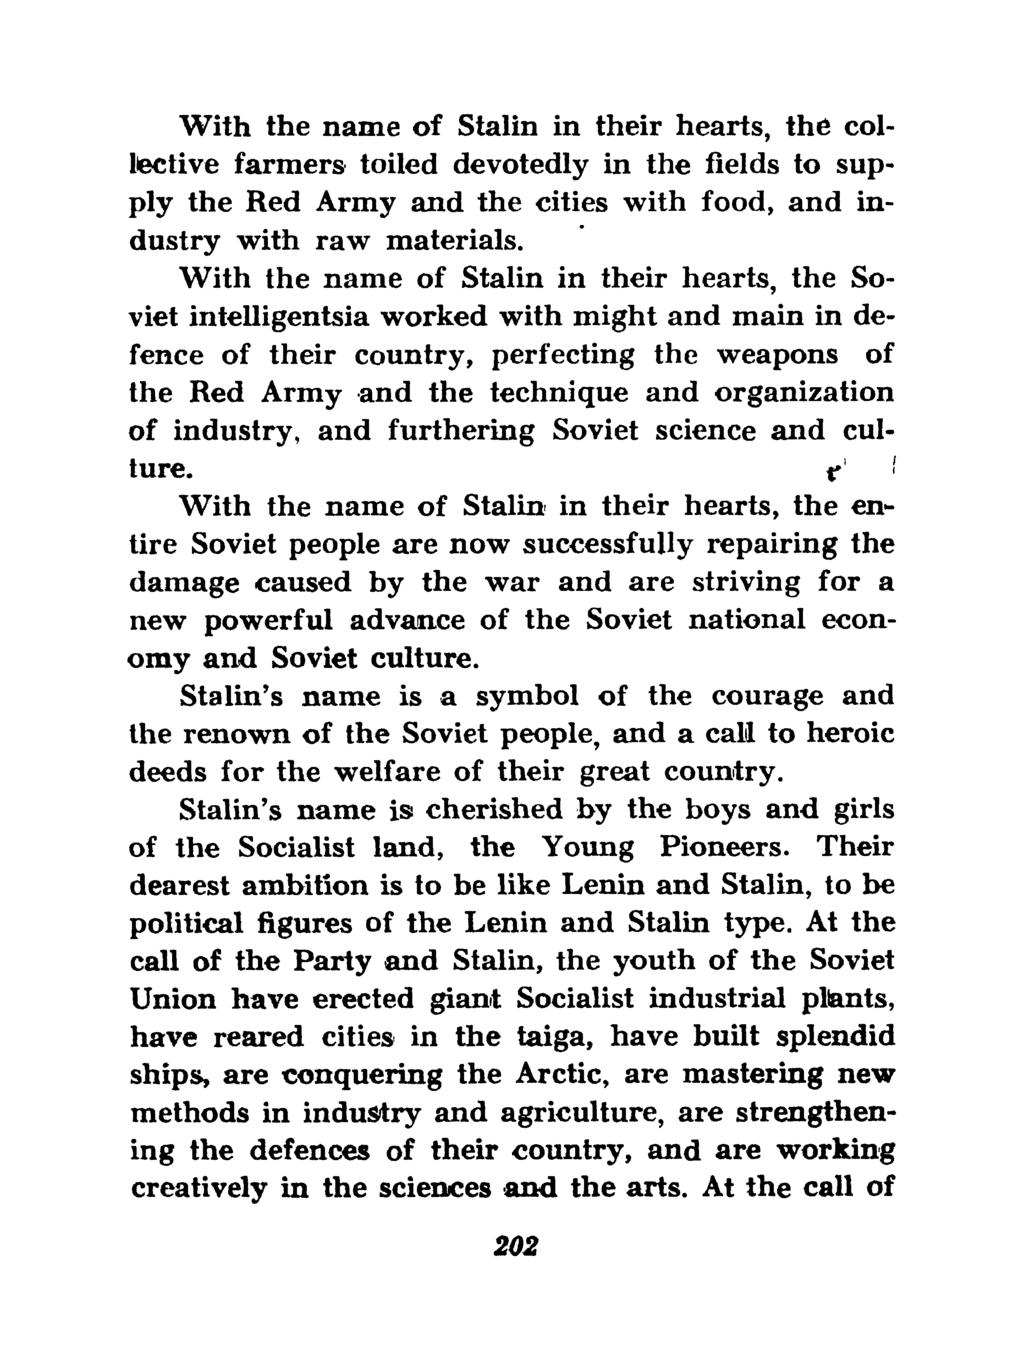 ' With the name of Stalin in their hearts, the colliective farmers toiled devotedly in the fields to sup- with food, and in- ply the Red Army and the cities dustry with raw materials.